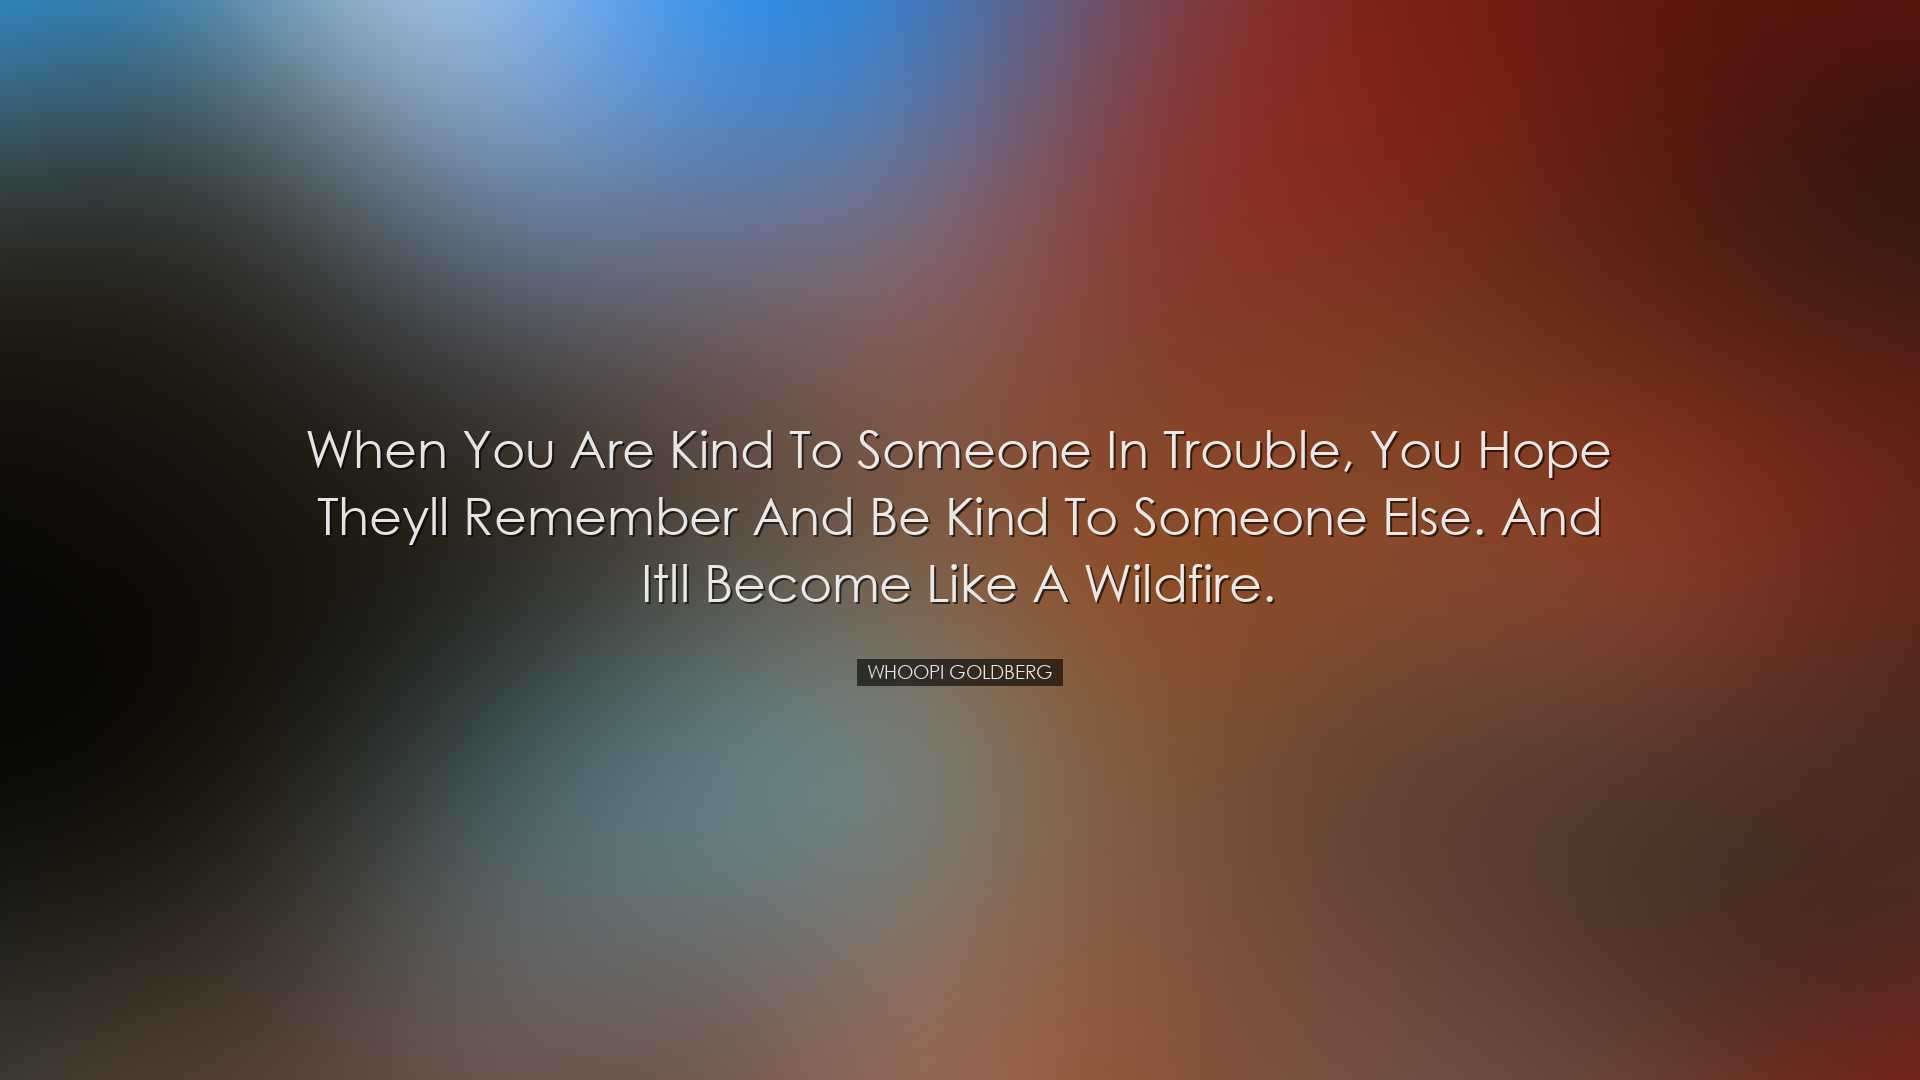 When you are kind to someone in trouble, you hope theyll remember